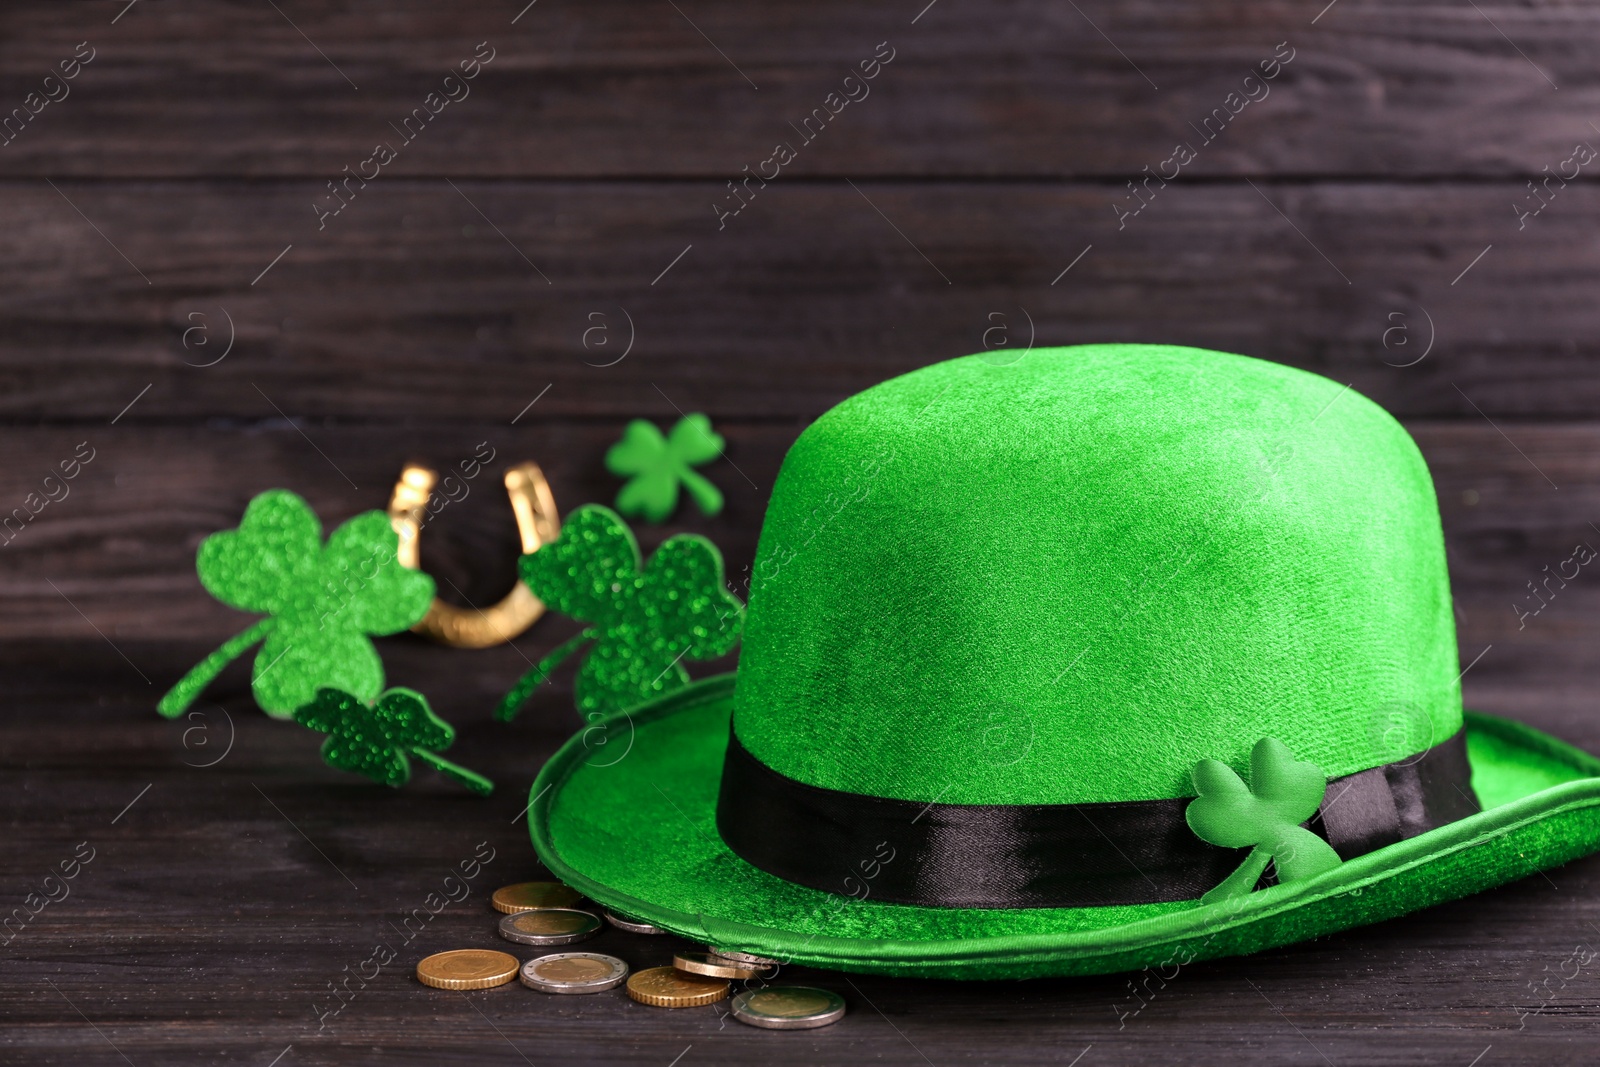 Photo of Leprechaun's hat and St. Patrick's day decor on black wooden table